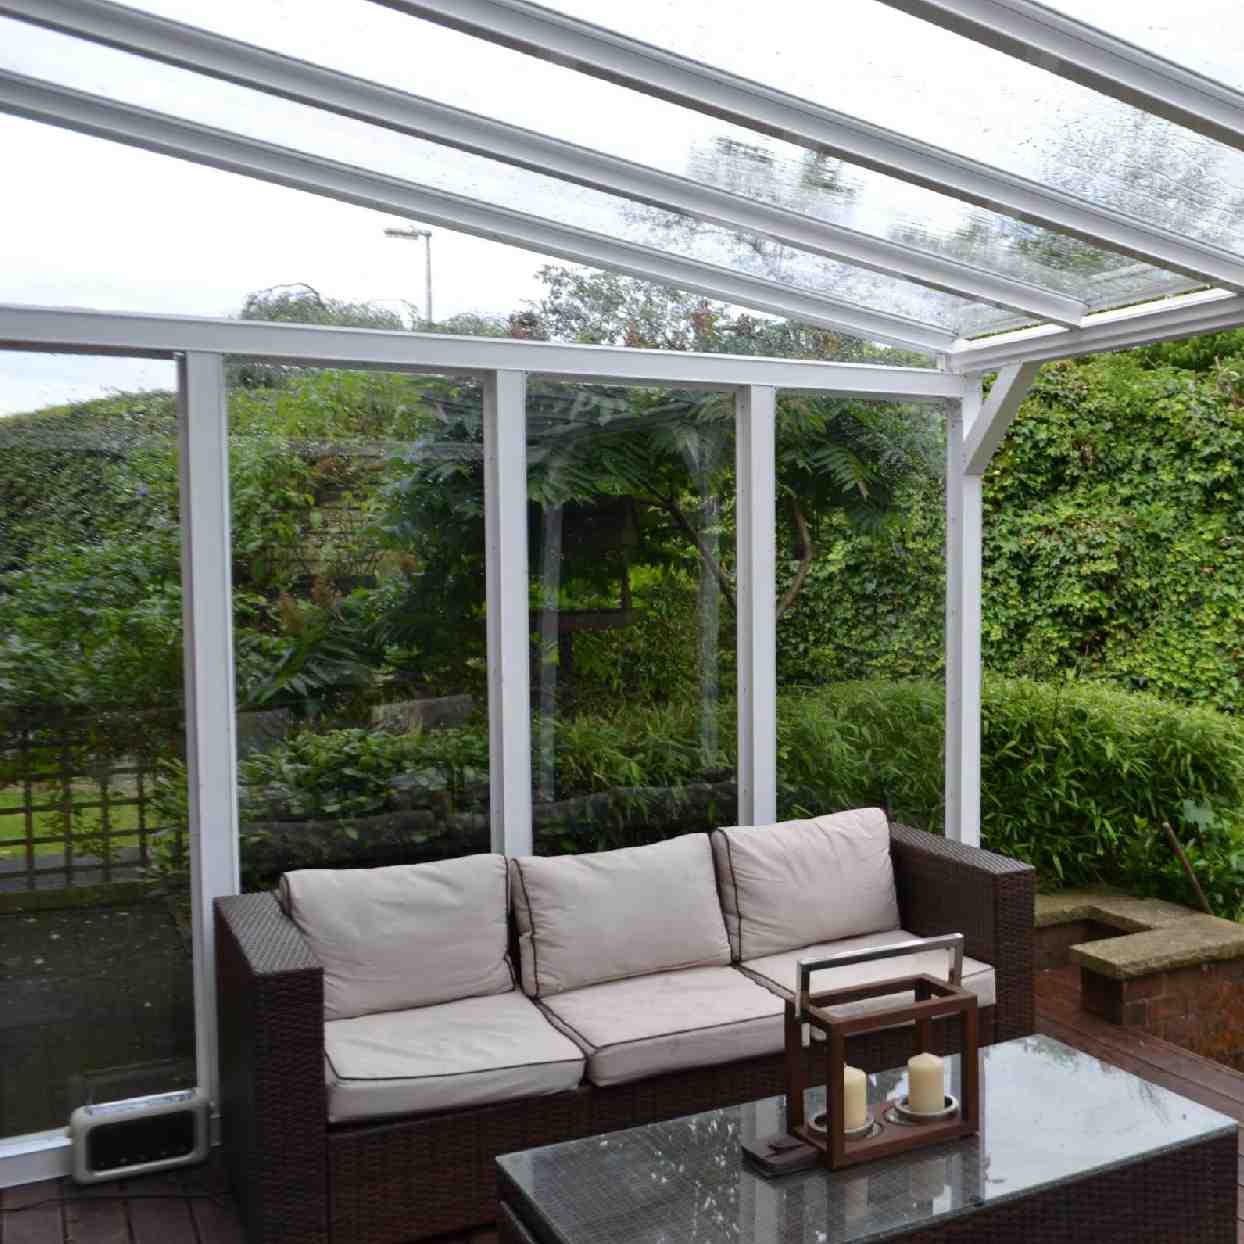 Buy Omega Verandah White with 16mm Polycarbonate Glazing - 2.8m (W) x 3.5m (P), (2) Supporting Posts online today